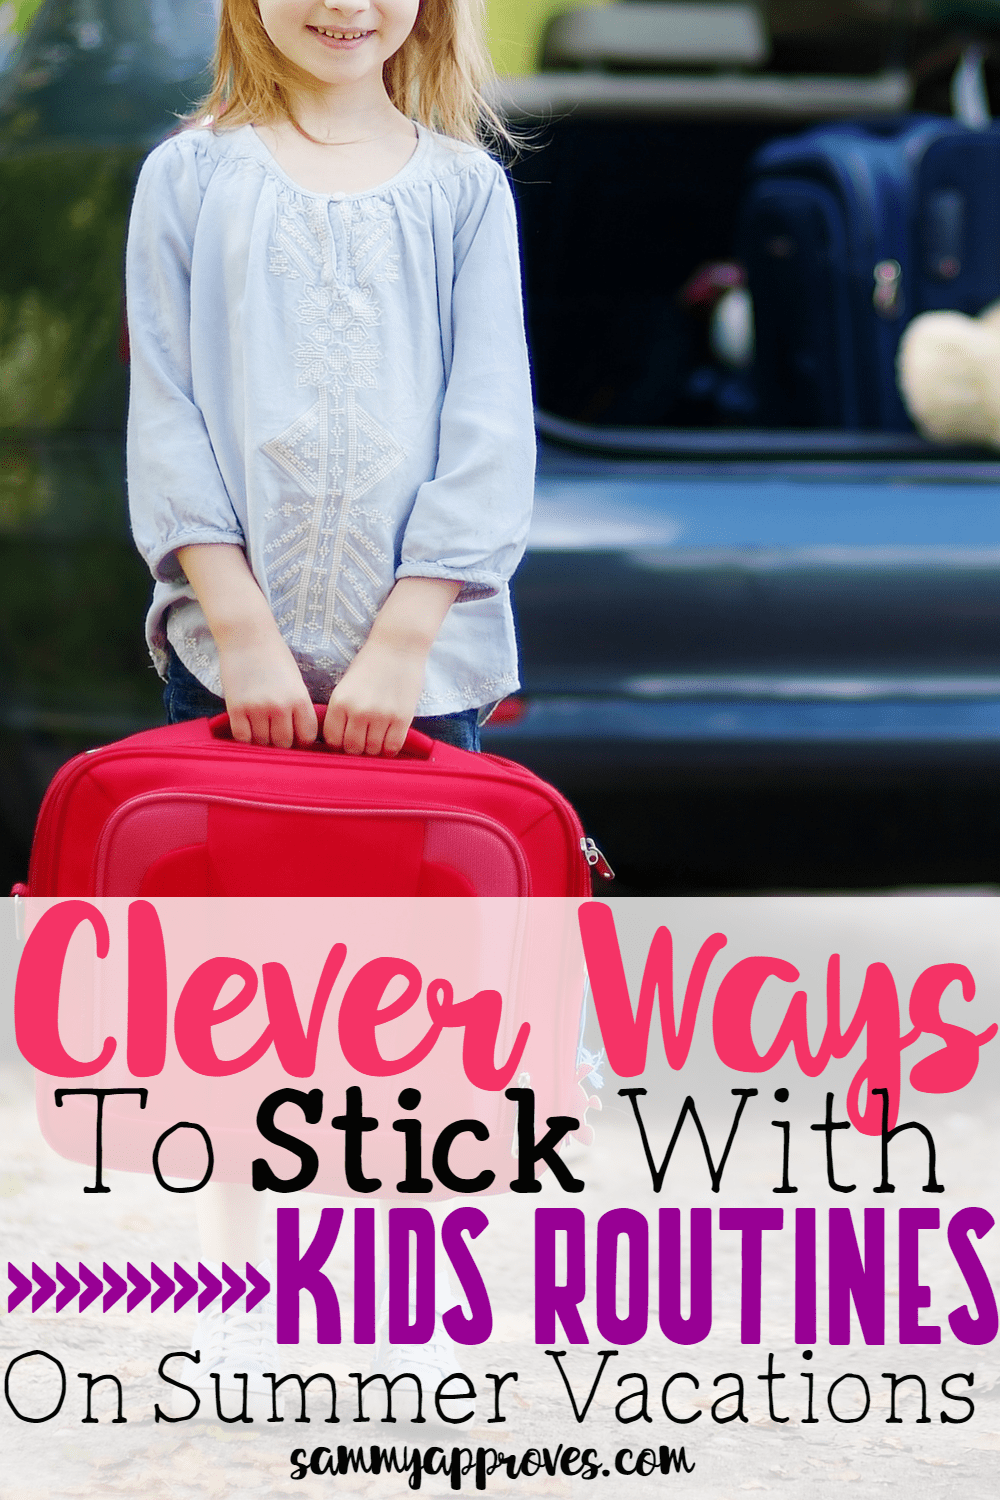 Clever Ways to Stick With Kids Routines on Summer Vacations